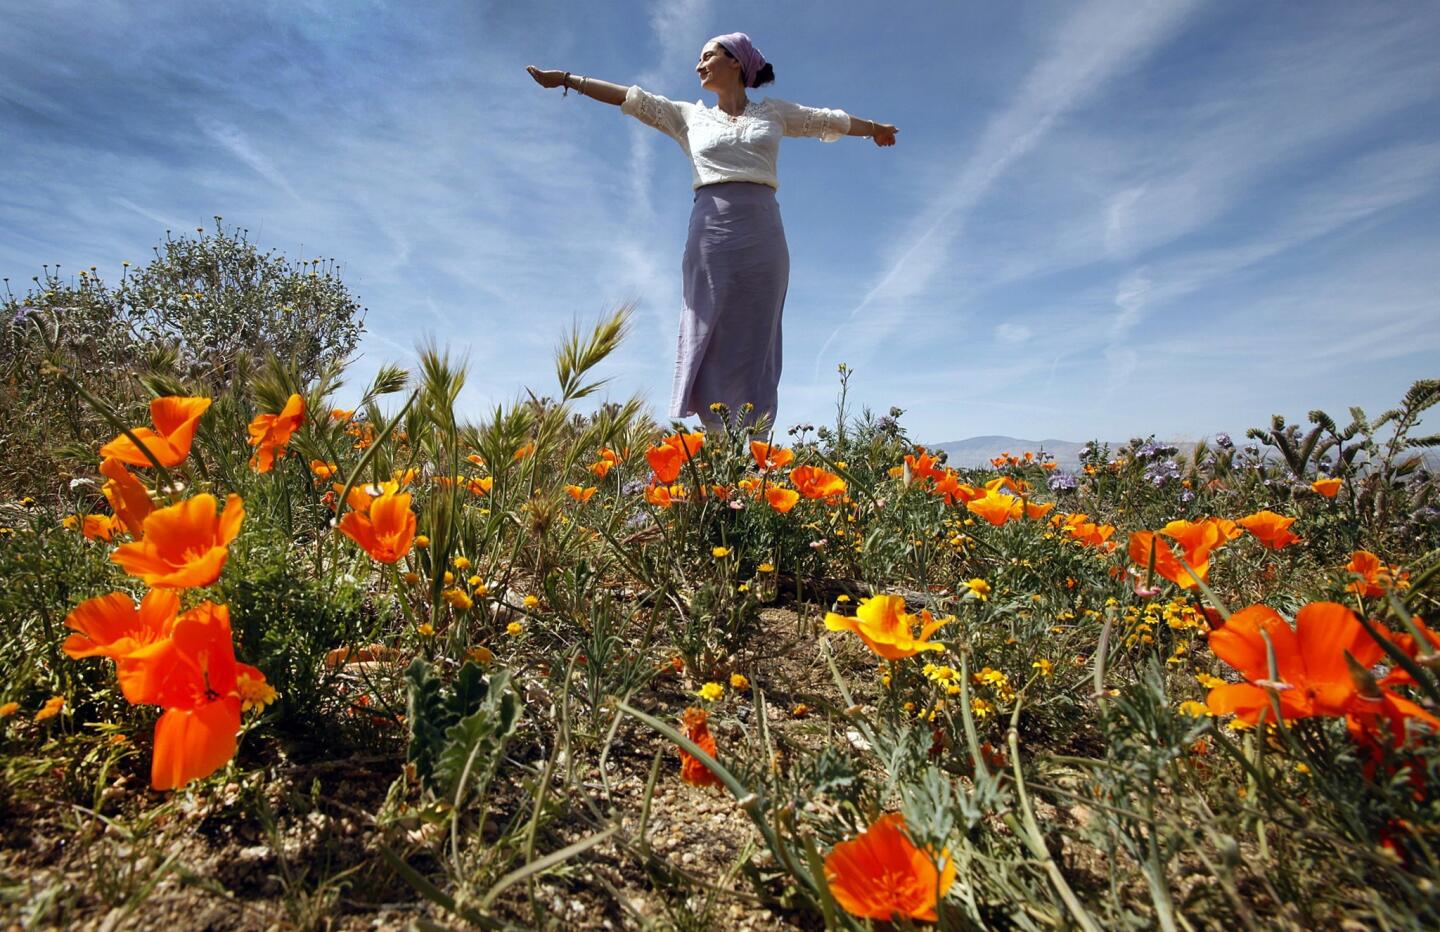 Gian Prem, of Venice, poses for a photograph at the Antelope Valley California Poppy Reserve near Lancaster, where the Poppy Festival will be held this weekend.